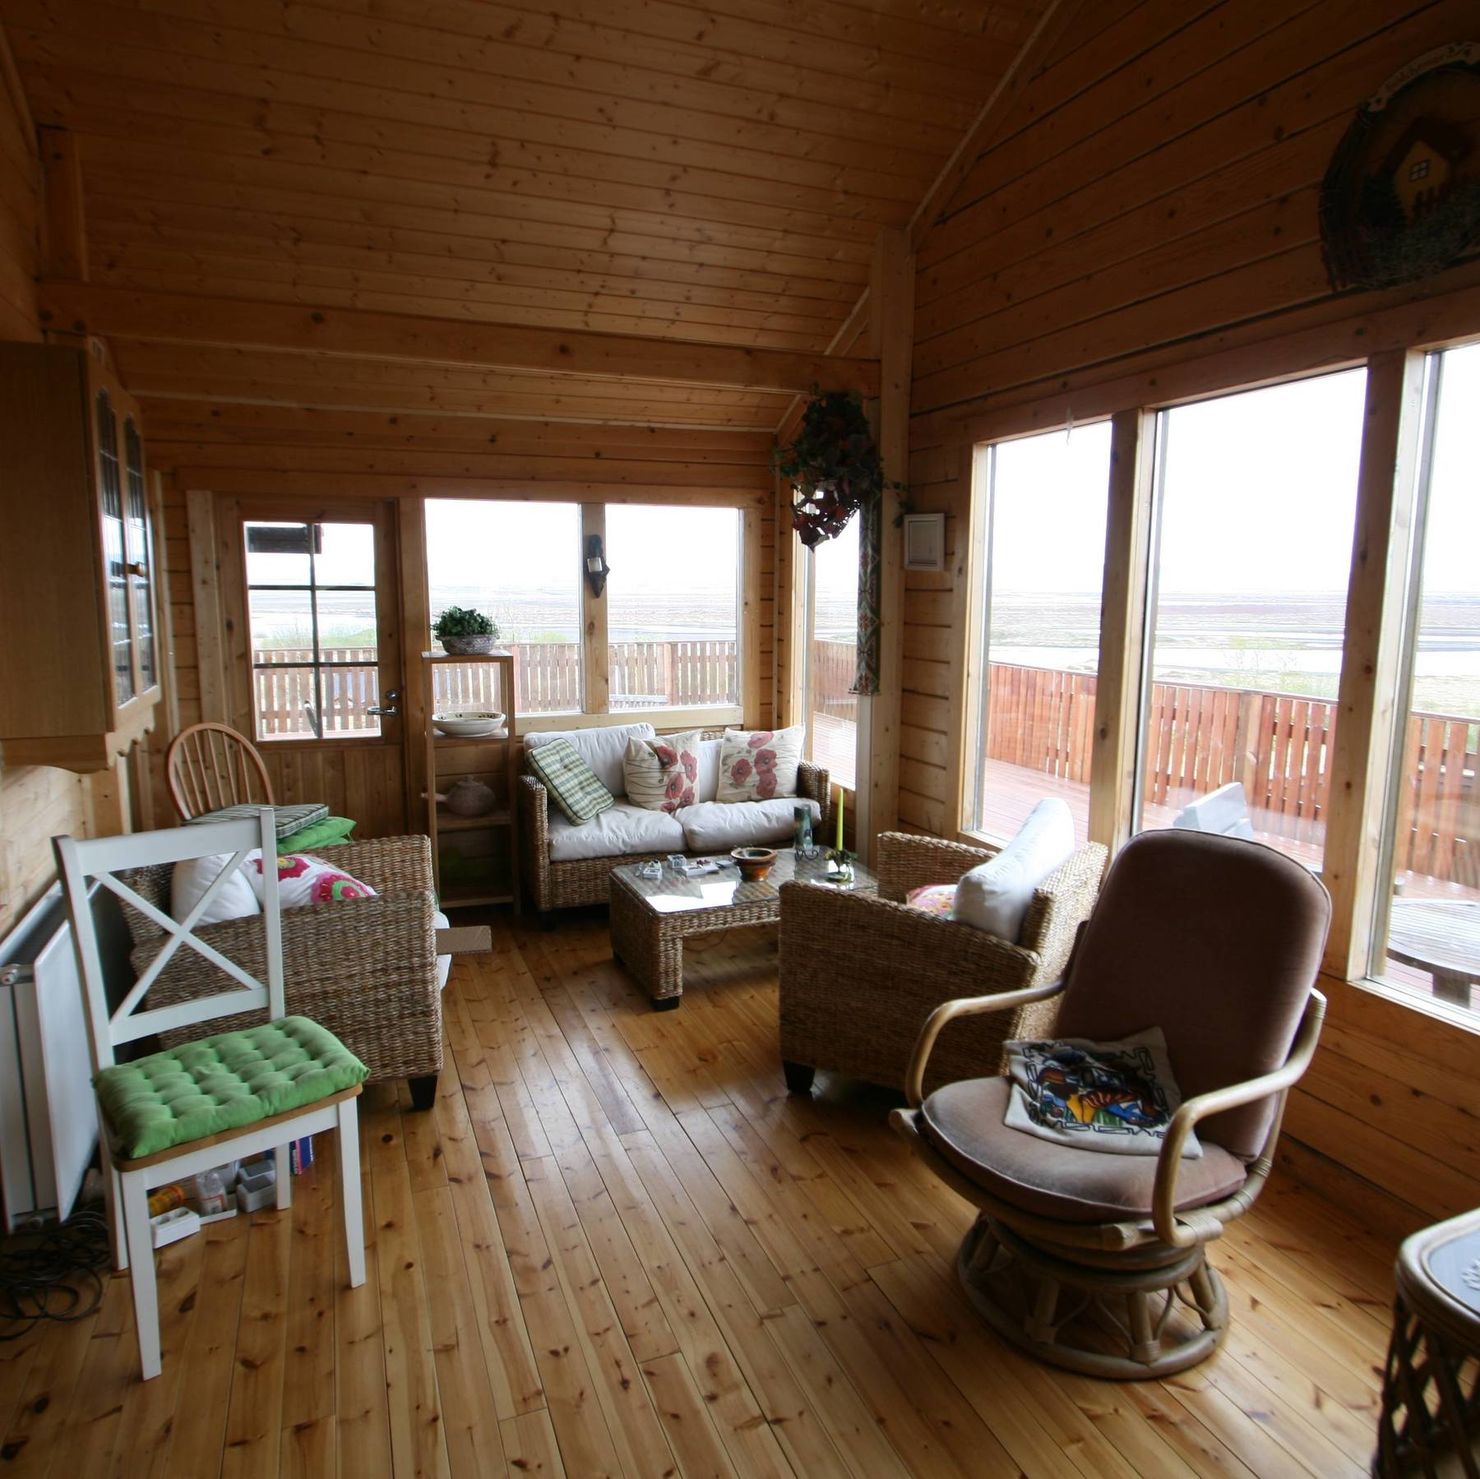 The cosy living area has panoramic windows. The view of the southern Icelandic landscape is impressive